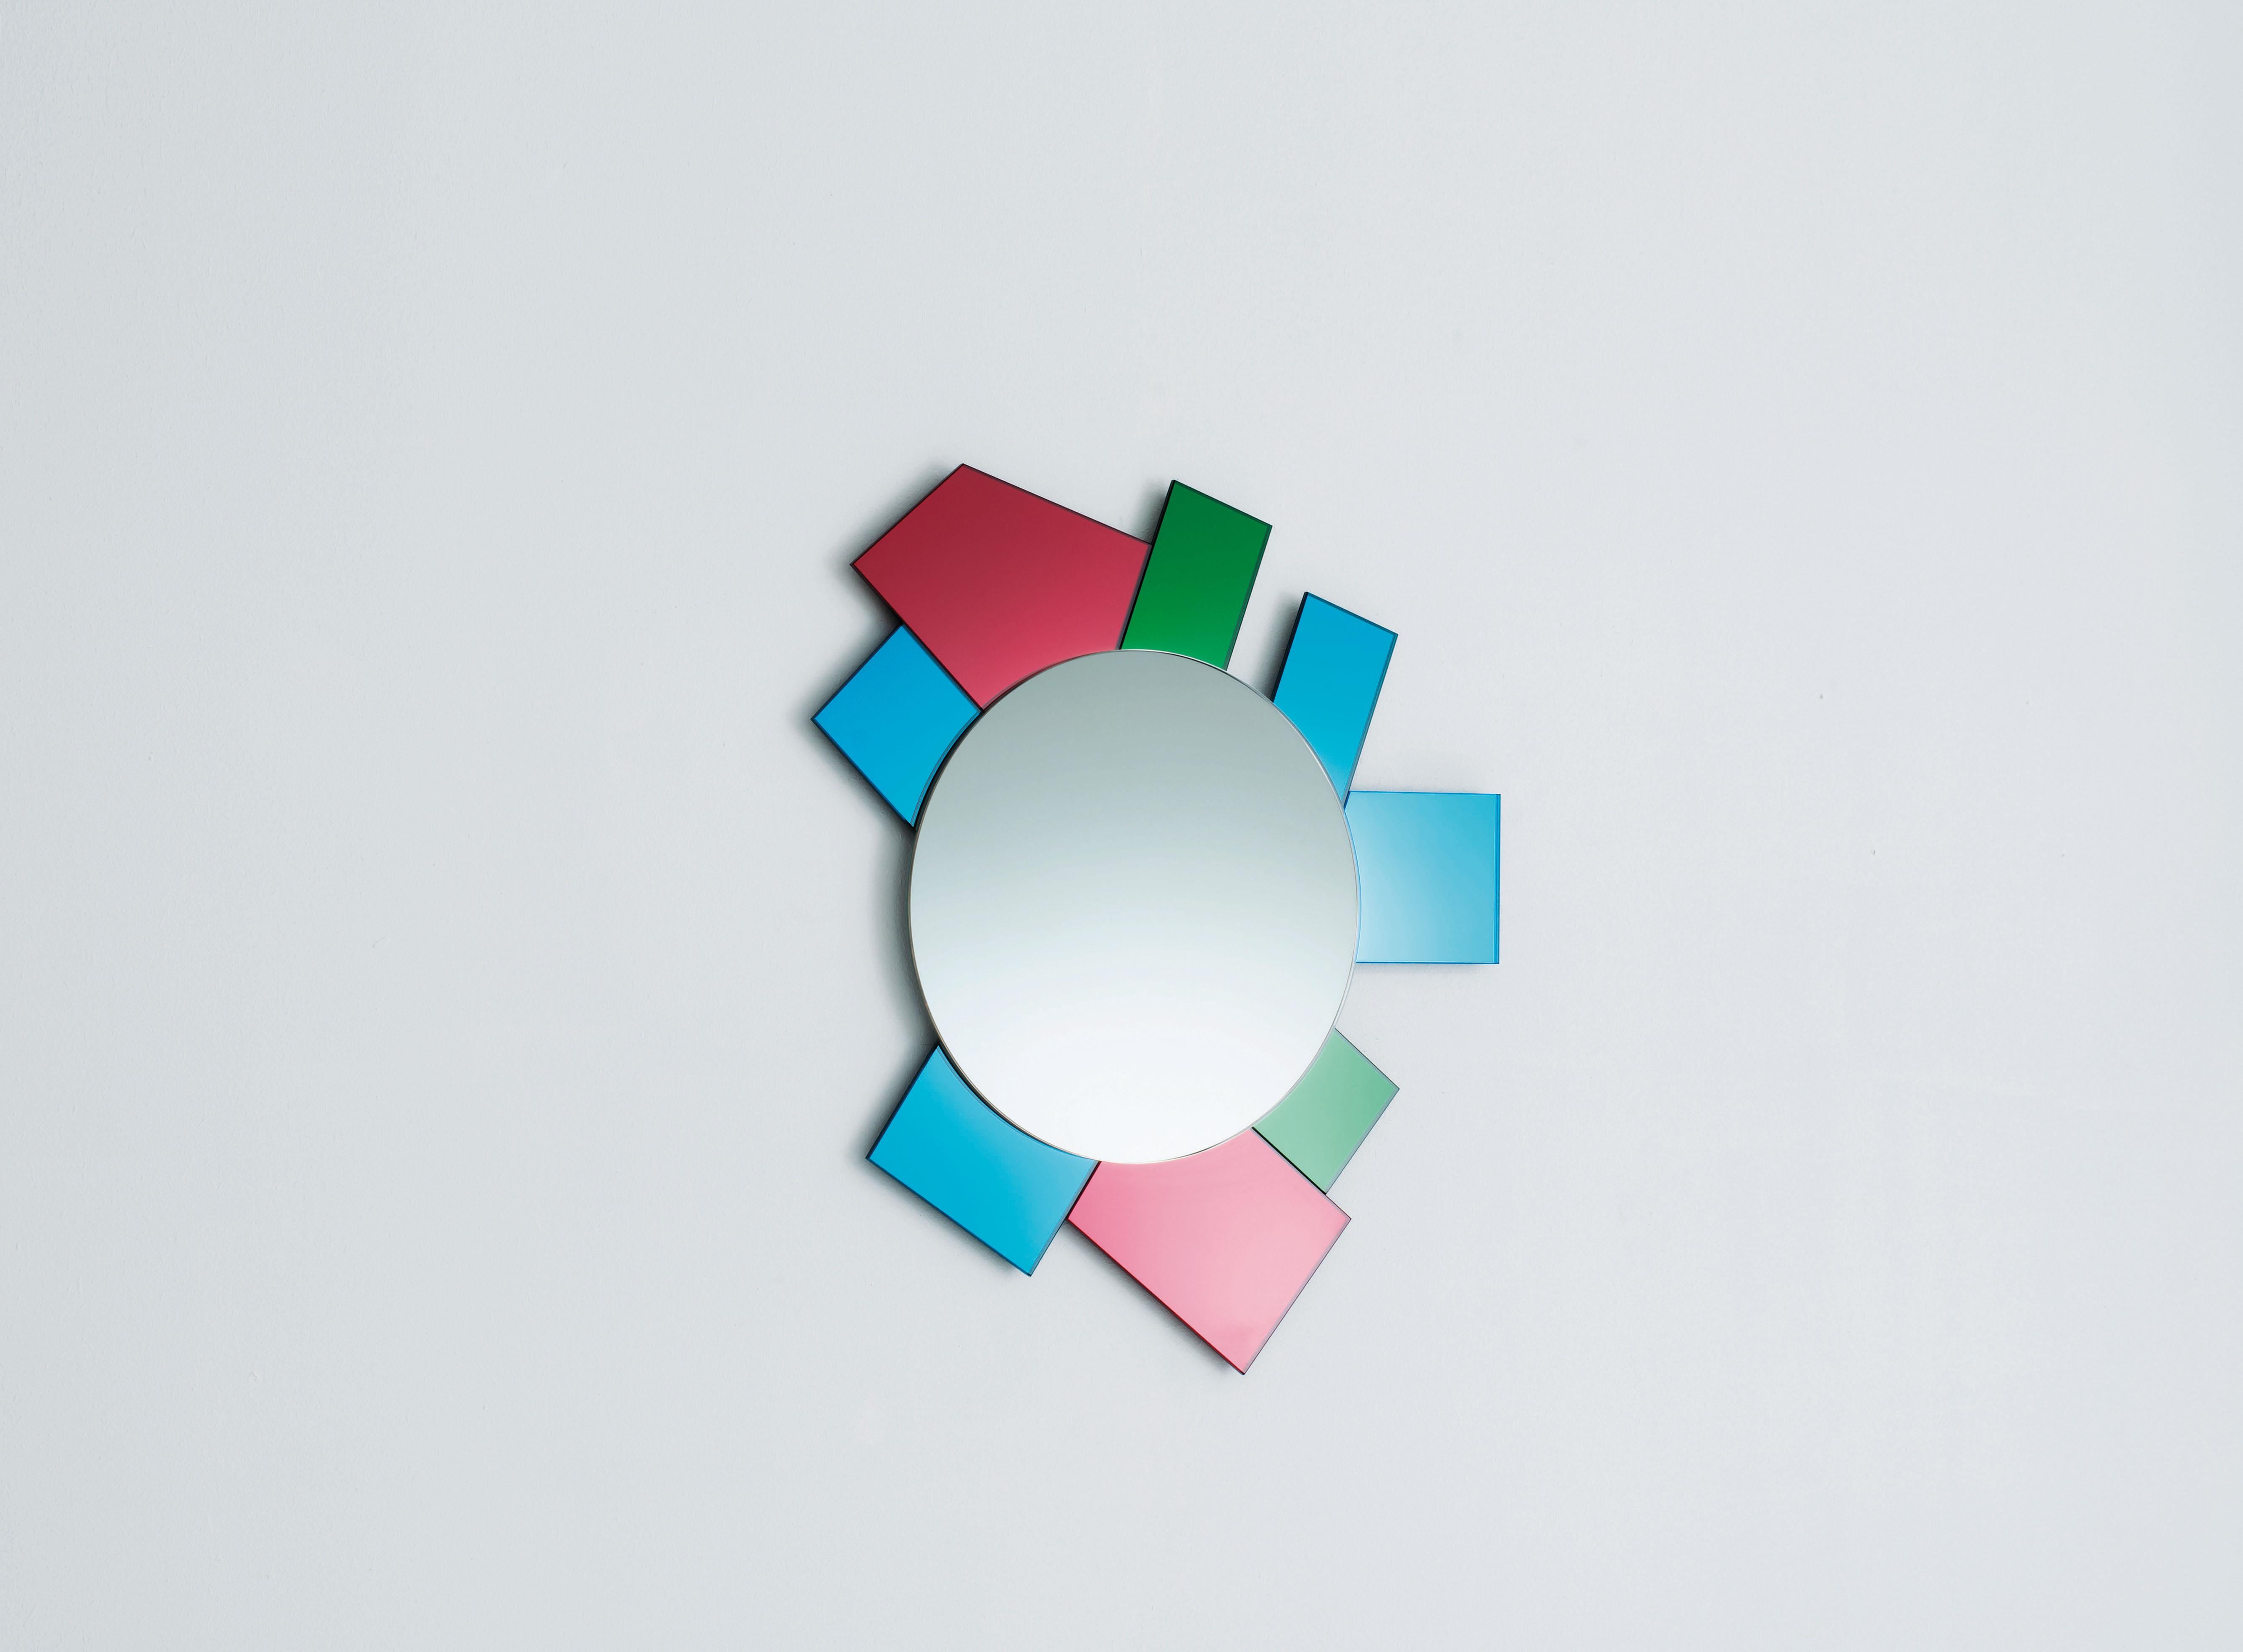 Dioniso6 Gli Specchi di Dioniso wall mirror is from a collection of 6 wall mirrors in different shapes and sizes characterizes by polychromatic frames composed of elements in laminated colored mirror, colored laminated glass and lacquered